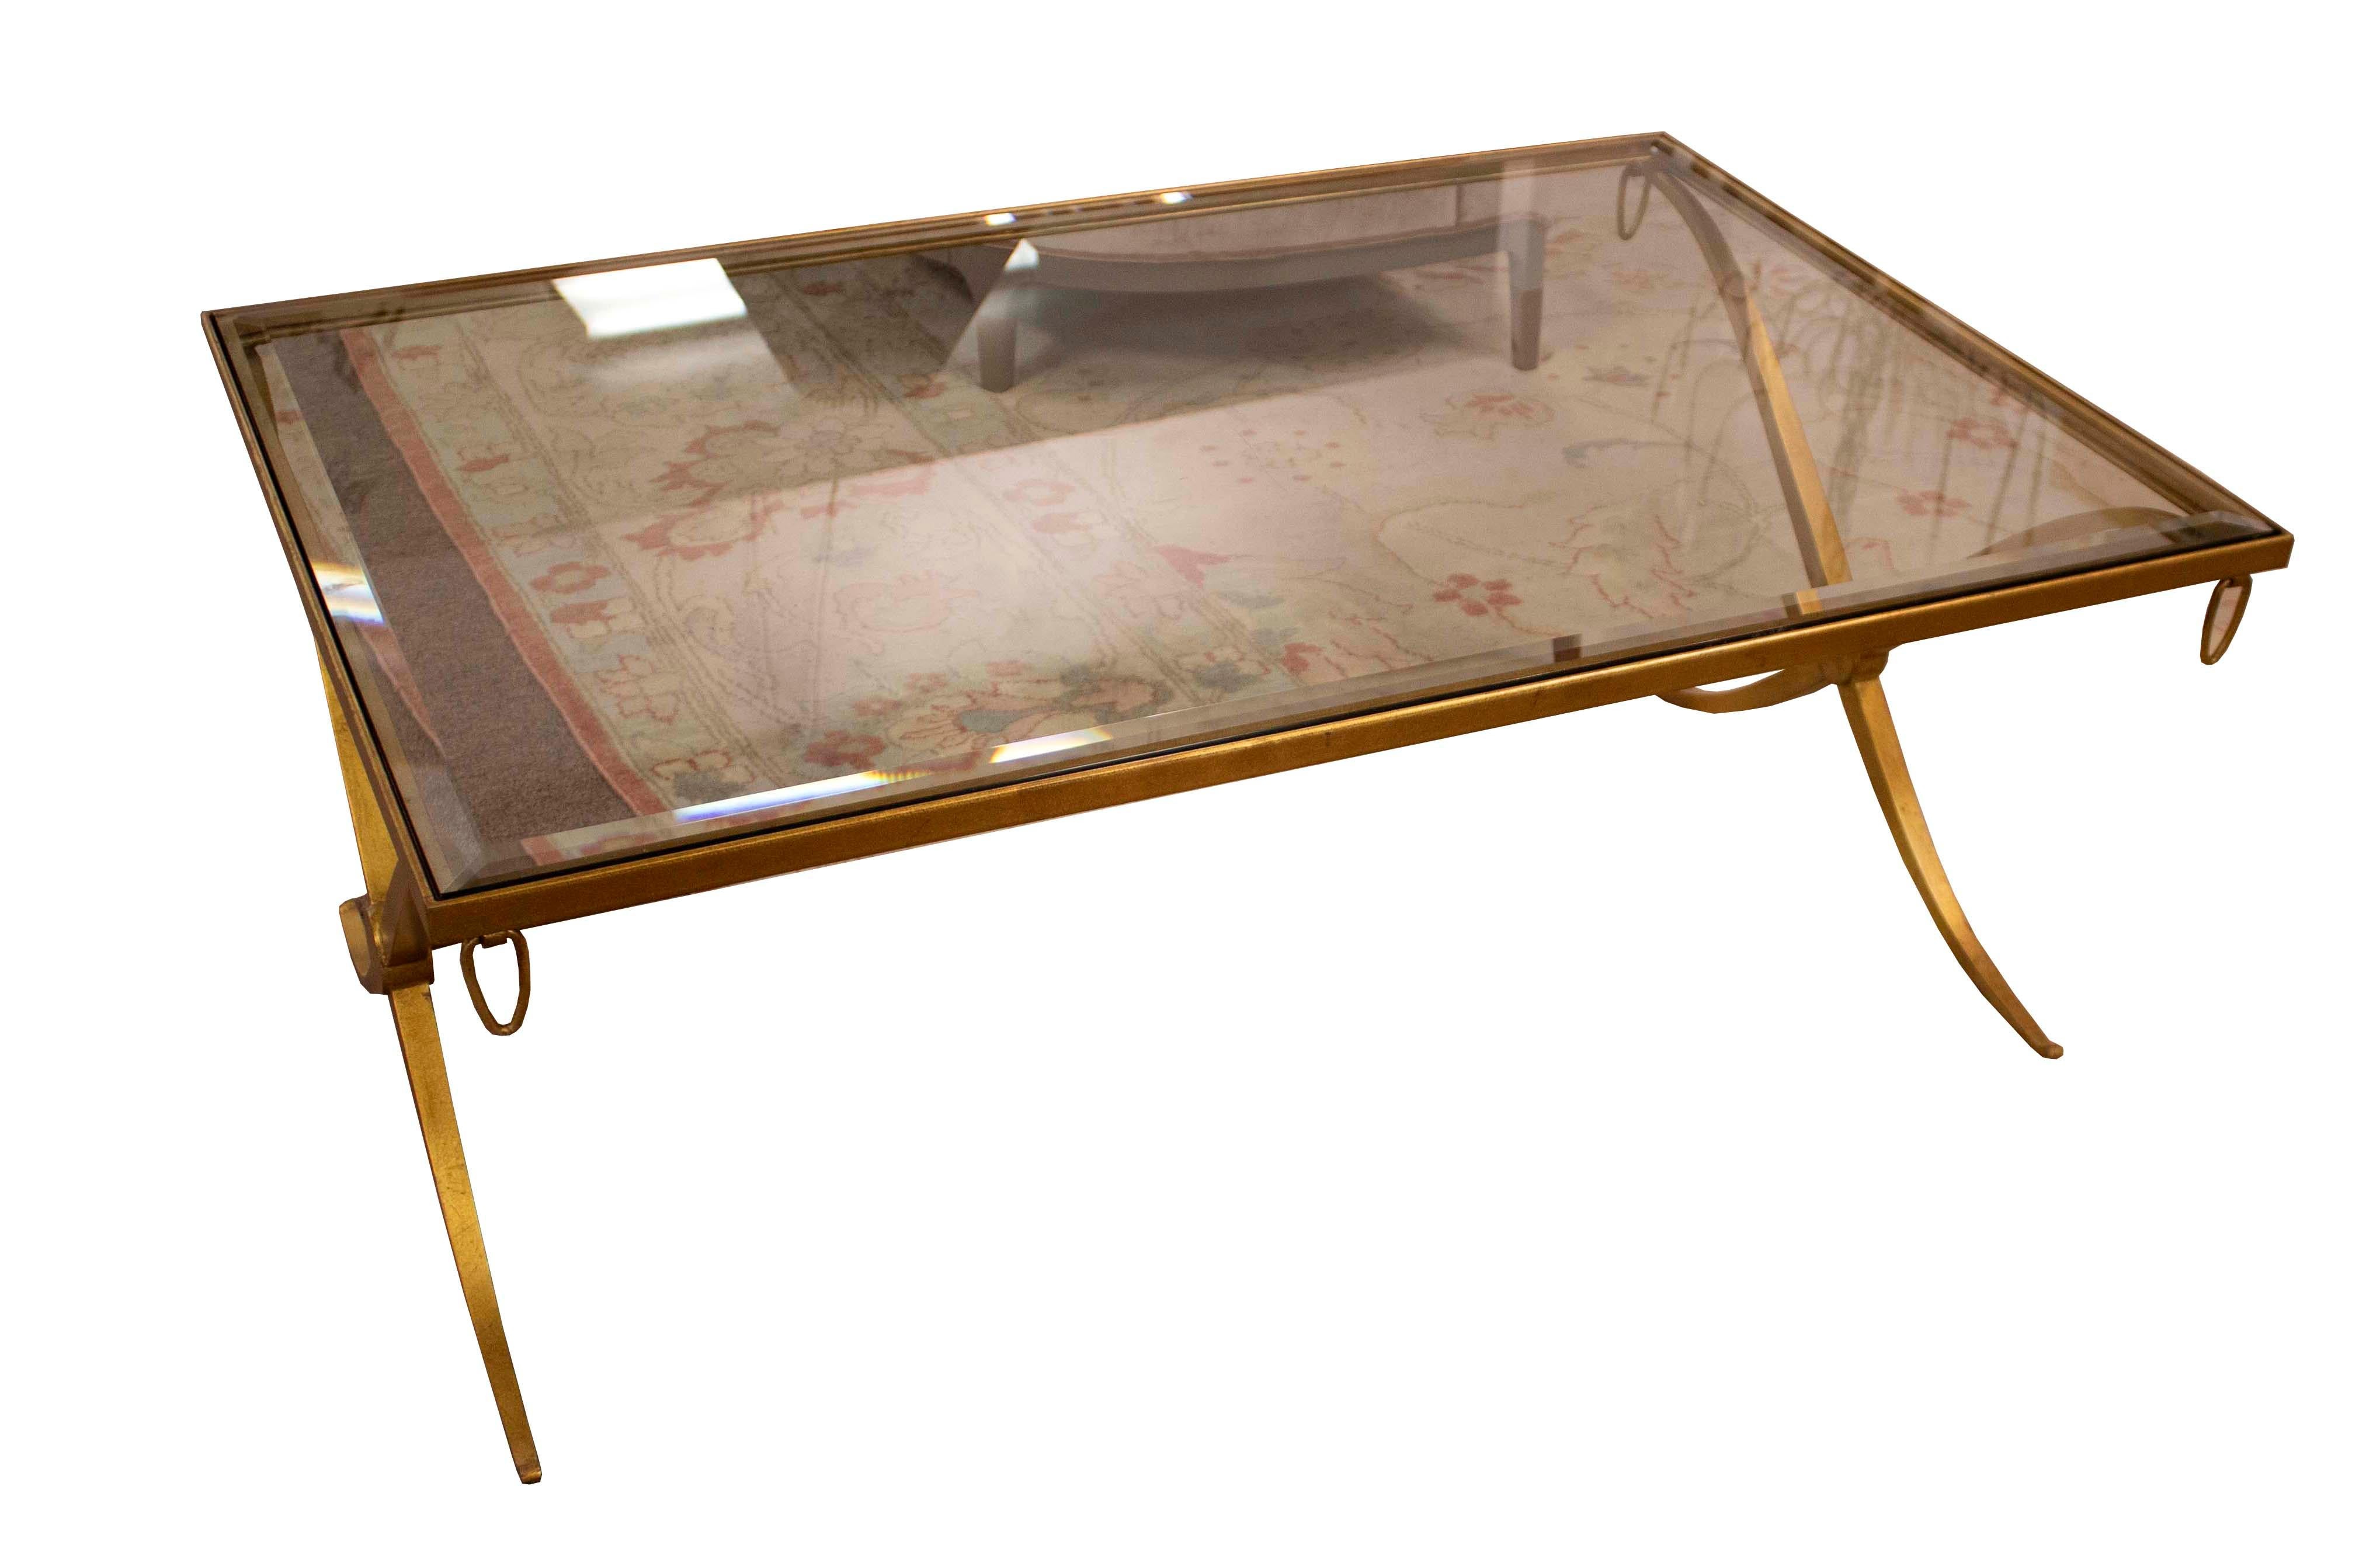 Up for offer is this sophisticated cocktail table with a beveled glass top and accented by a gold leaf metal x-base. Clean lines make this piece versatile enough for most aesthetics.
 